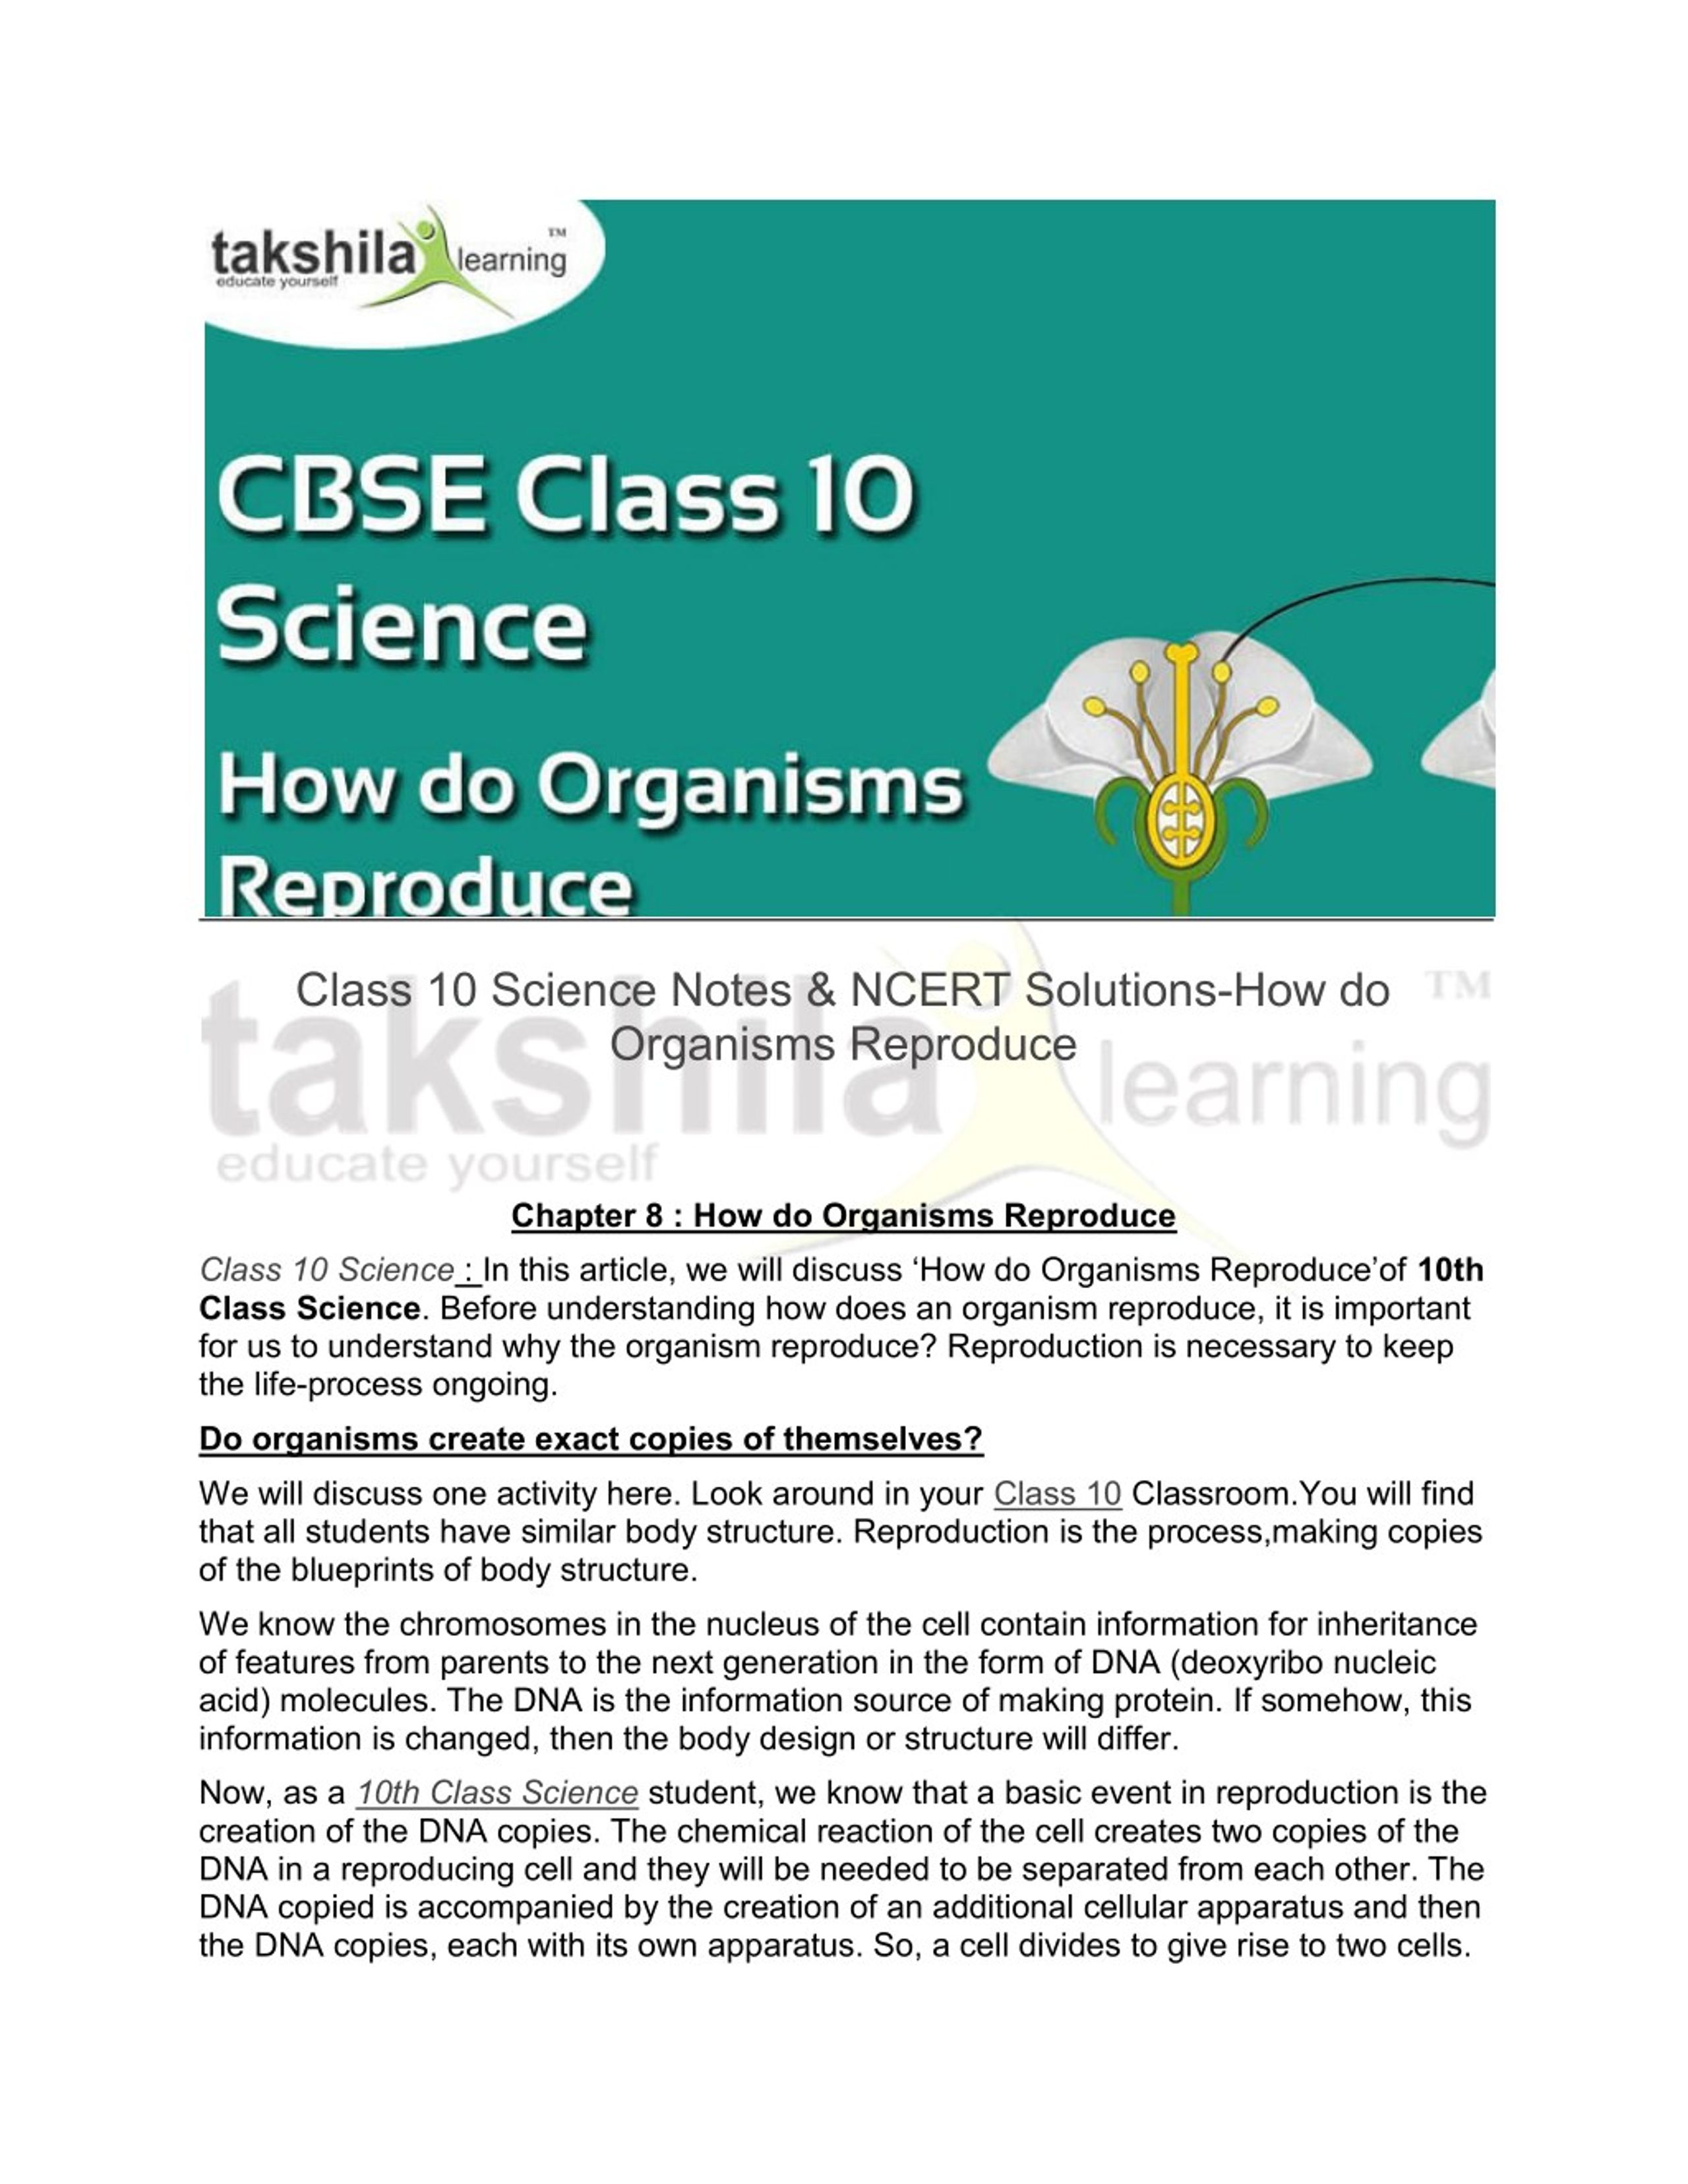 PPT - Class 10 Science Notes & NCERT Solutions-How do organisms reproduce  PowerPoint Presentation - ID:7685223